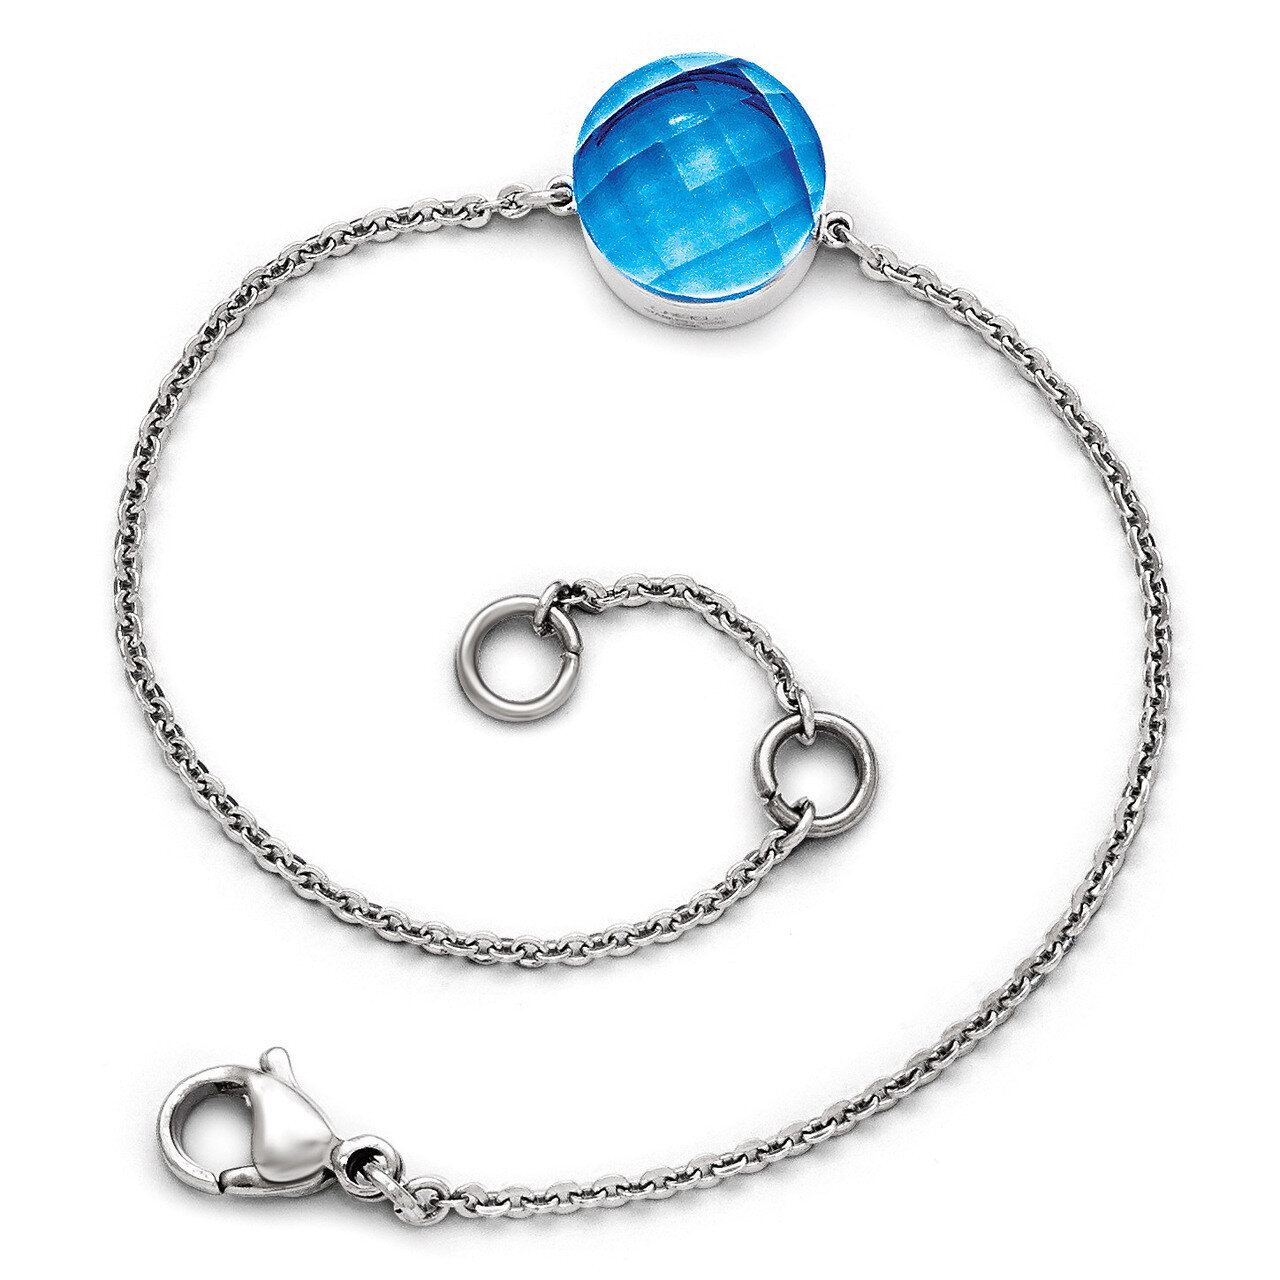 Polished Blue Glass with 1 Inch Extension Bracelet - Stainless Steel SRB1604-7